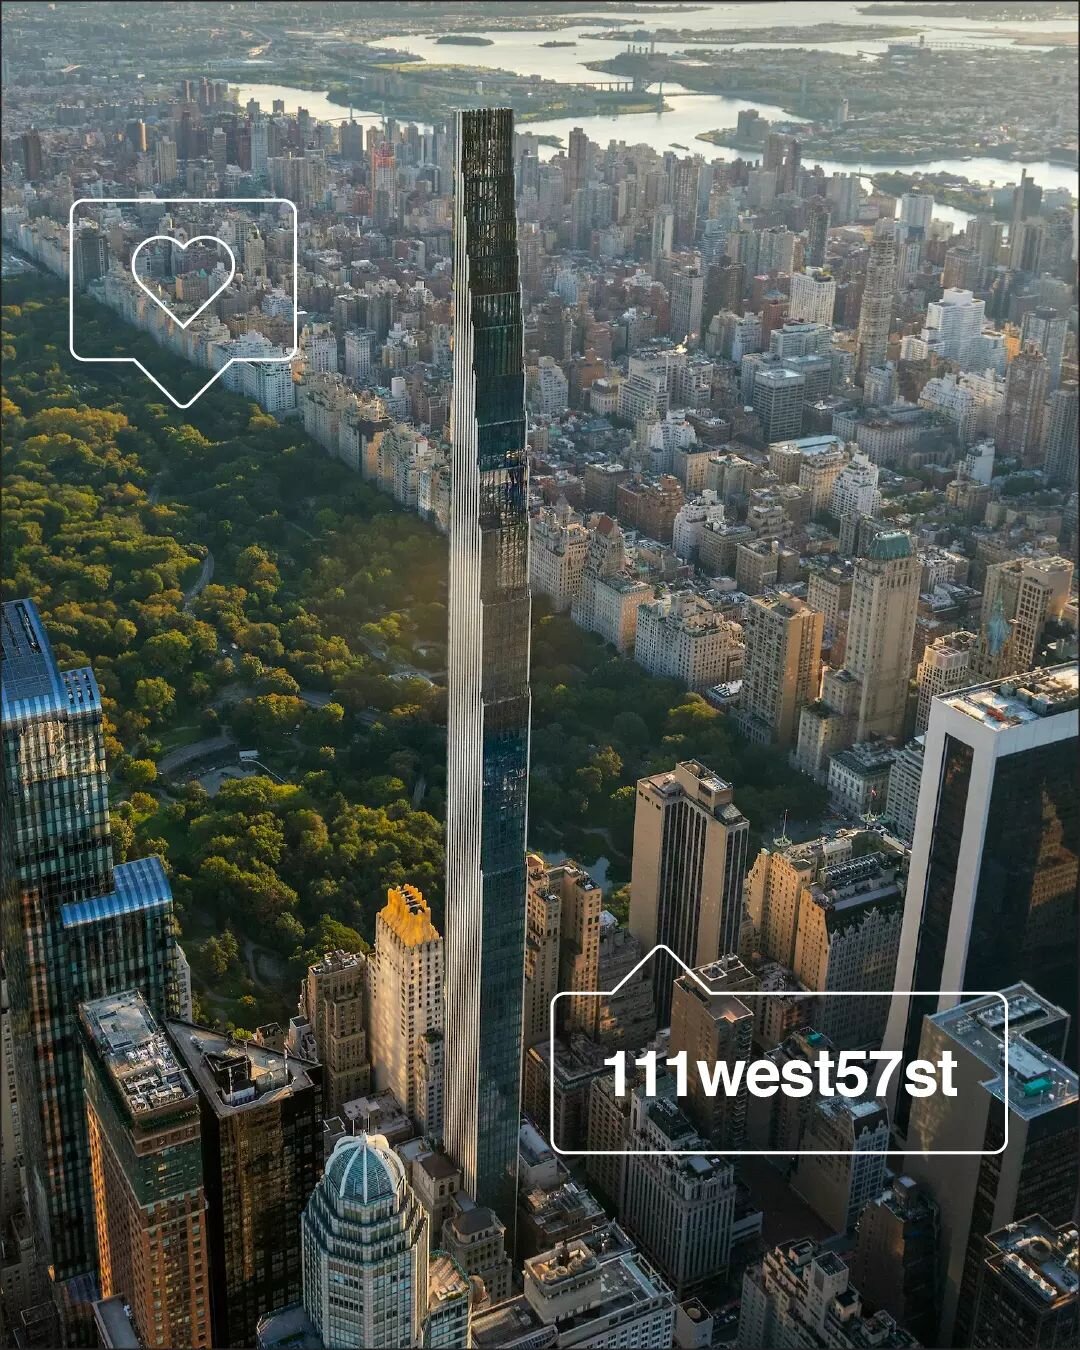 NEUE INSPO | Soaring above the iconic Central Park, 111 West 57th Street in New York City challenges the norms of architecture with remarkable engineering and a striking design.

Apart from being recognised as the world's skinniest skyscraper, @111we